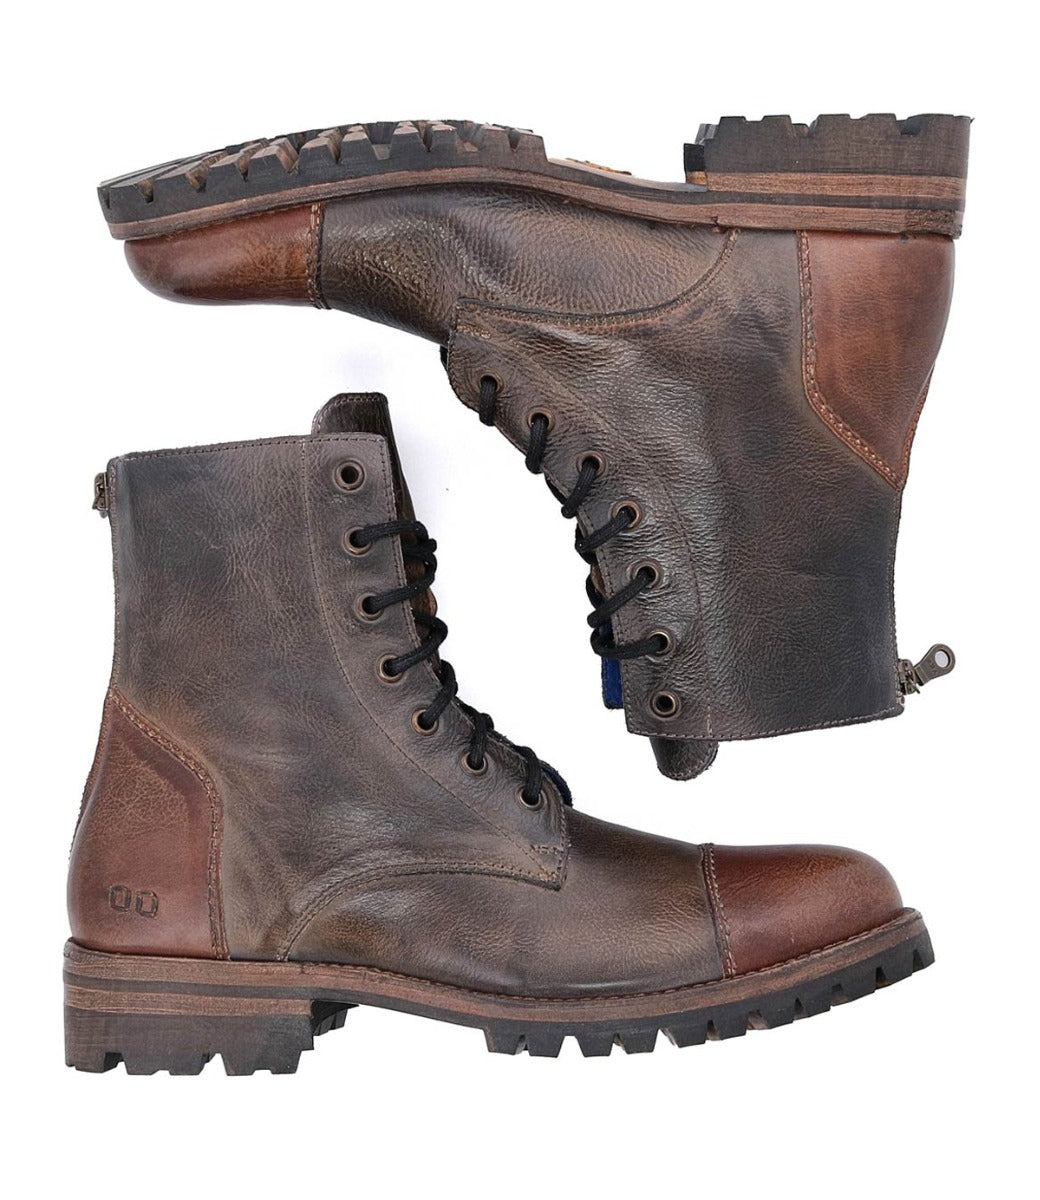 A pair of Bed Stu Protege Trek brown leather combat style lace-up boots isolated on a white background, shown from different angles.